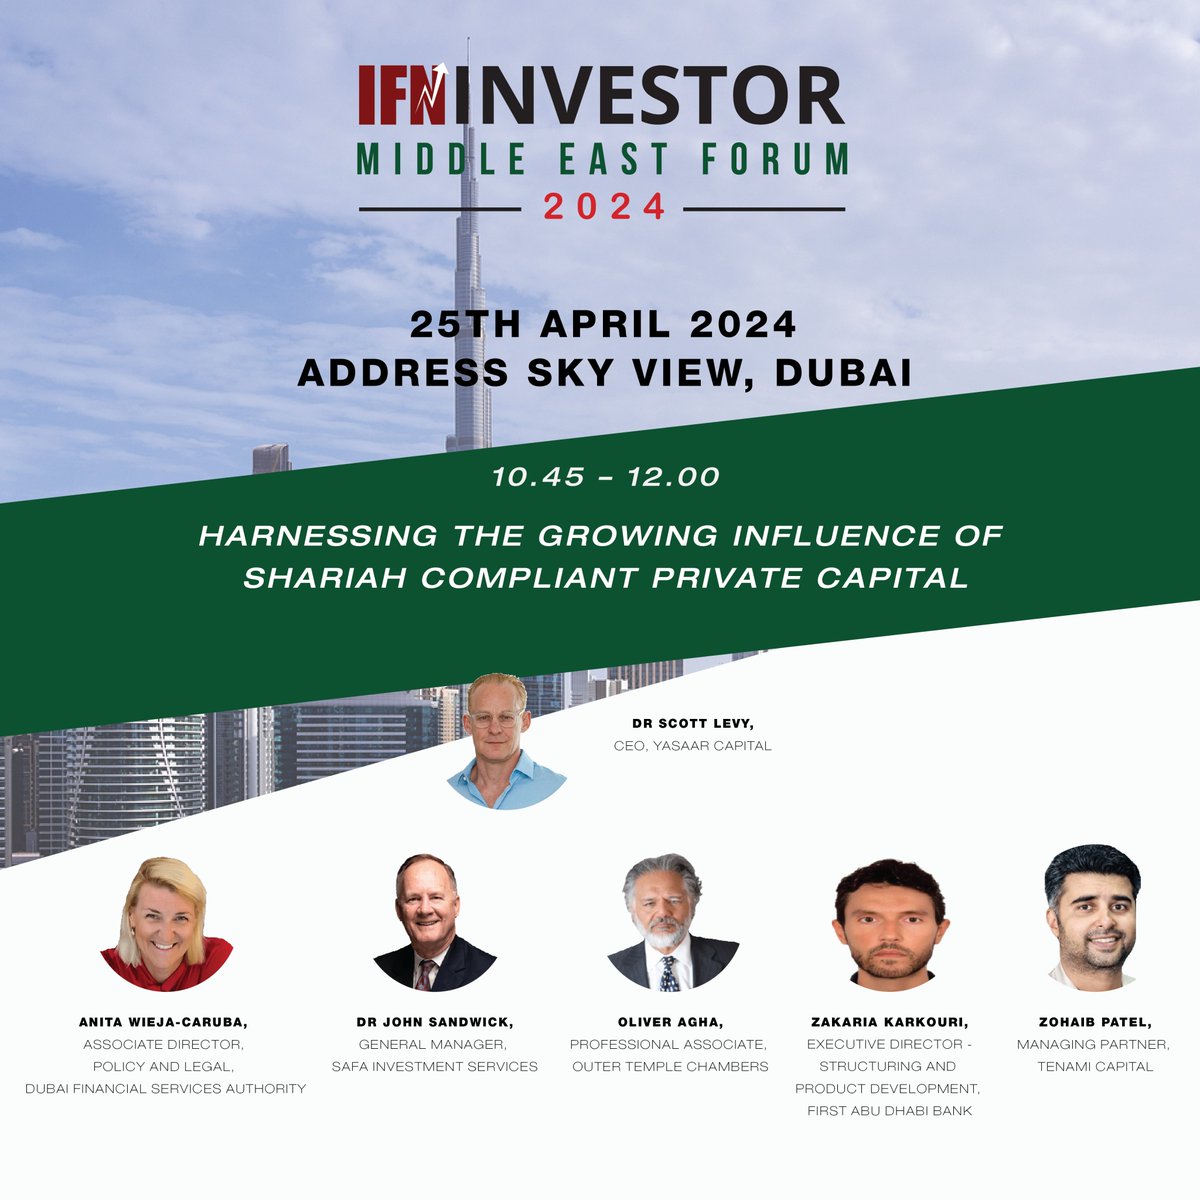 Hear the views of practitioners such as Dr Scott Levy, Anita Wieja-Caruba, Dr John Sandwick, Oliver Agha, Zakaria Karkouri and Zohaib Patel as they discuss the Growing Influence of Shariah Compliant Private Capital. redmoneyevents.com/event/ifninves… #IFNInvestorMiddleEastForum2024